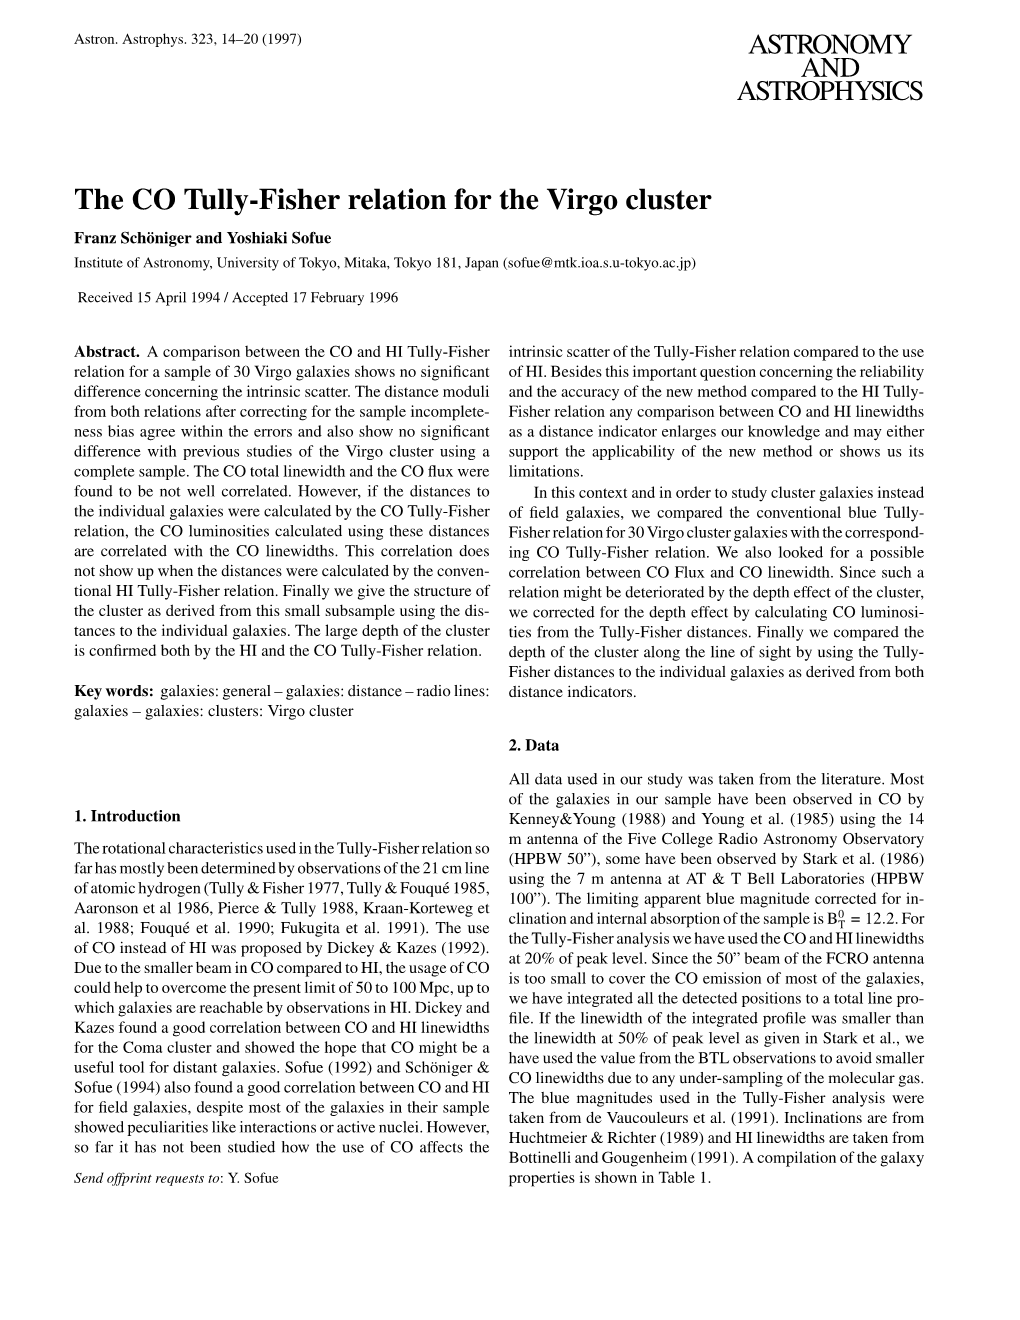 The CO Tully-Fisher Relation for the Virgo Cluster